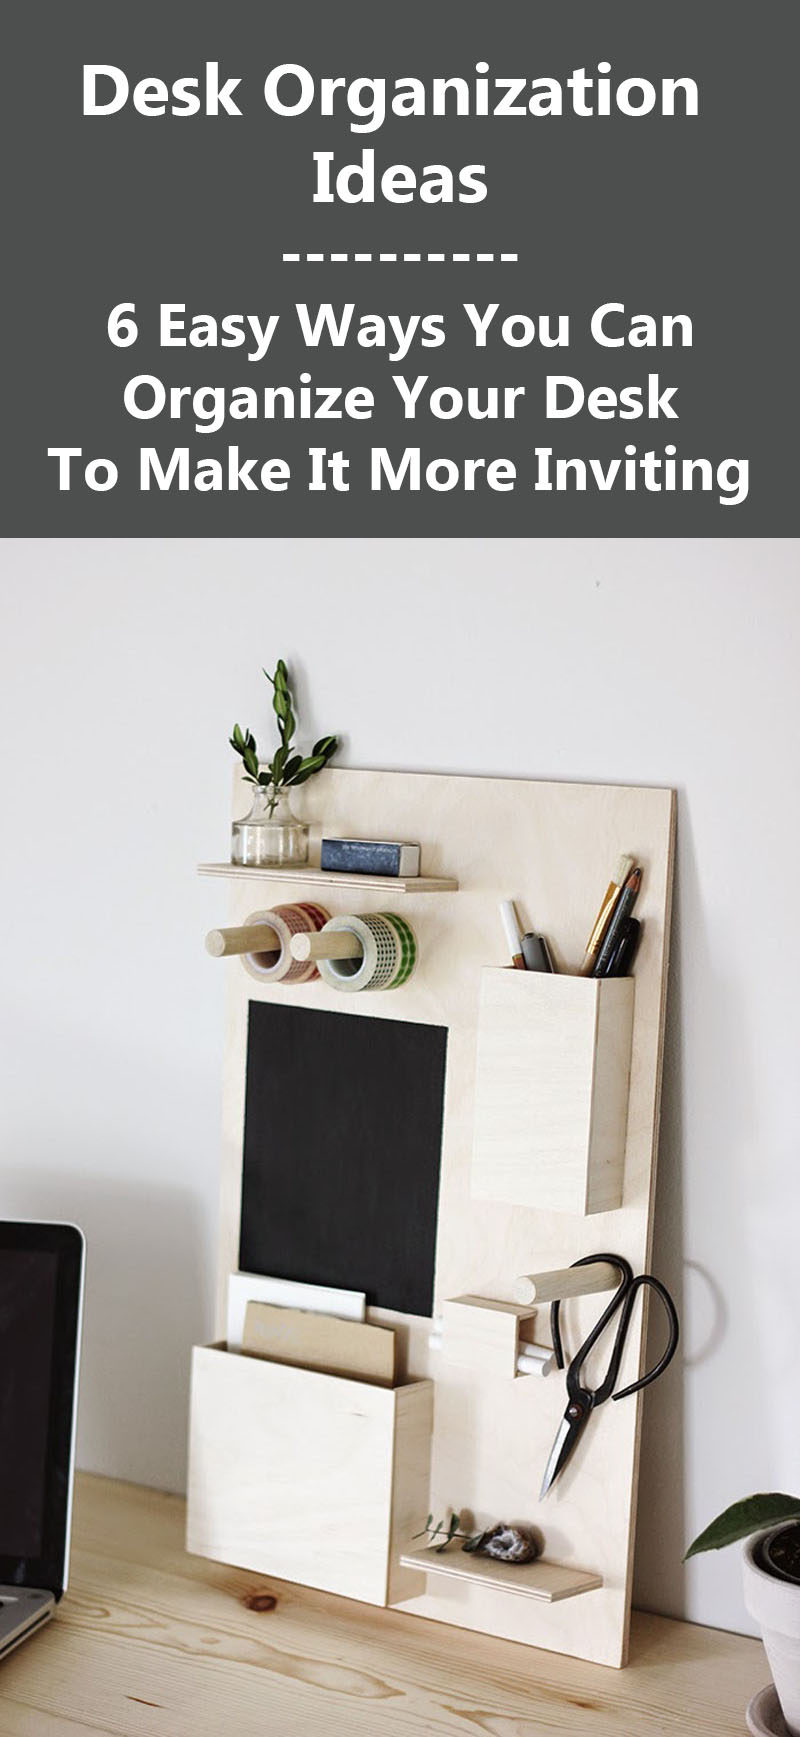 Desk Organization Ideas - 6 Easy Ways You Can Organize Your Desk To Make It More Inviting